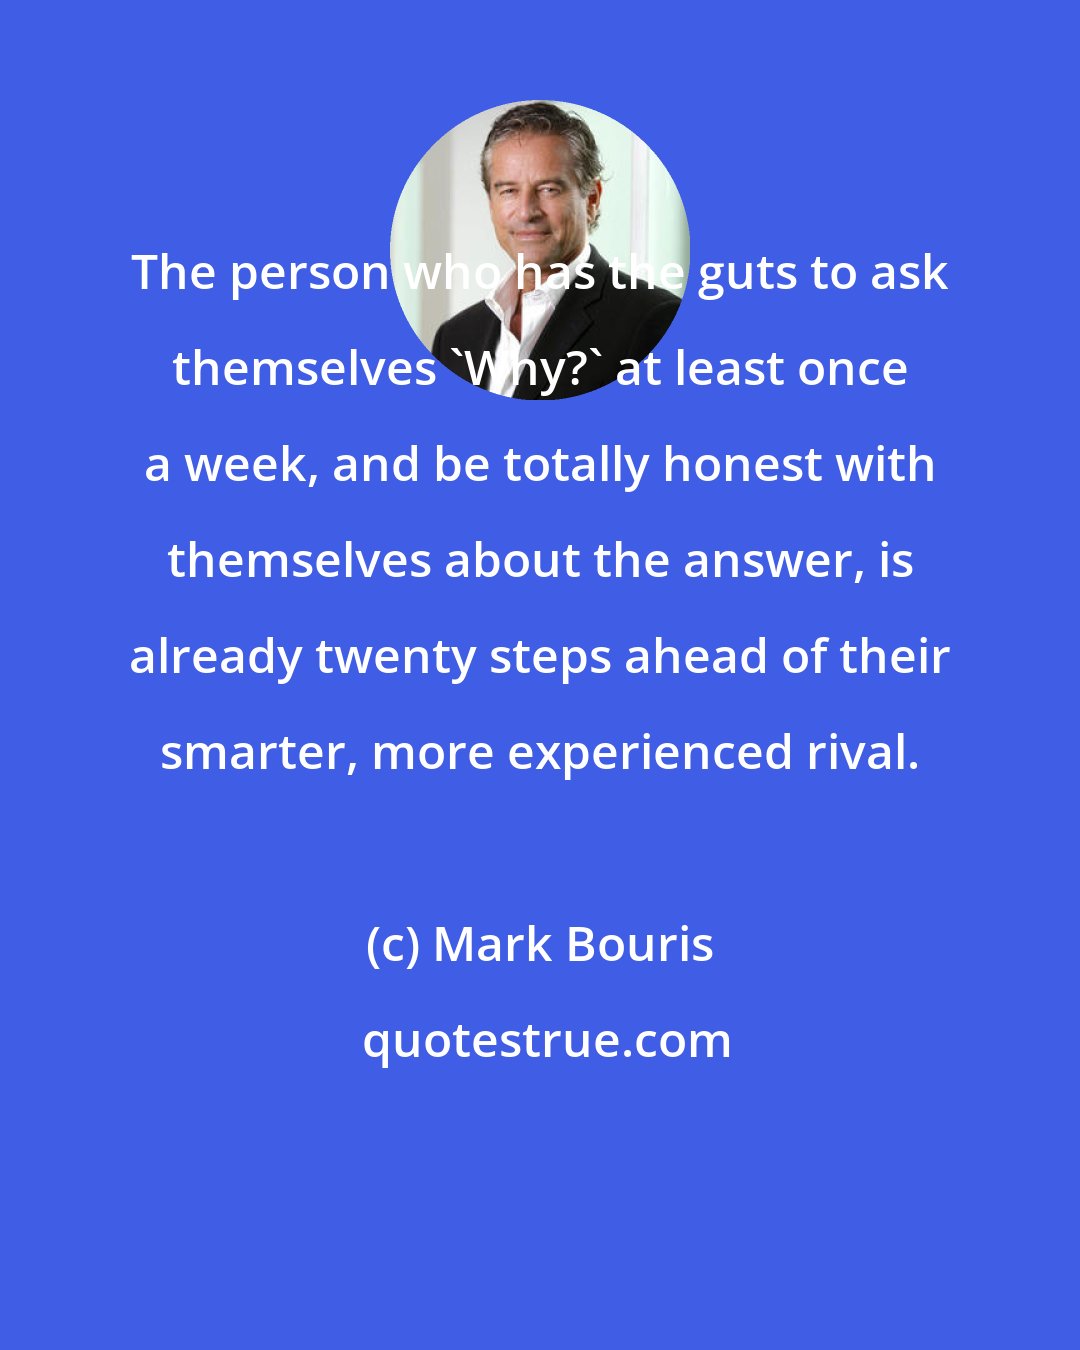 Mark Bouris: The person who has the guts to ask themselves 'Why?' at least once a week, and be totally honest with themselves about the answer, is already twenty steps ahead of their smarter, more experienced rival.